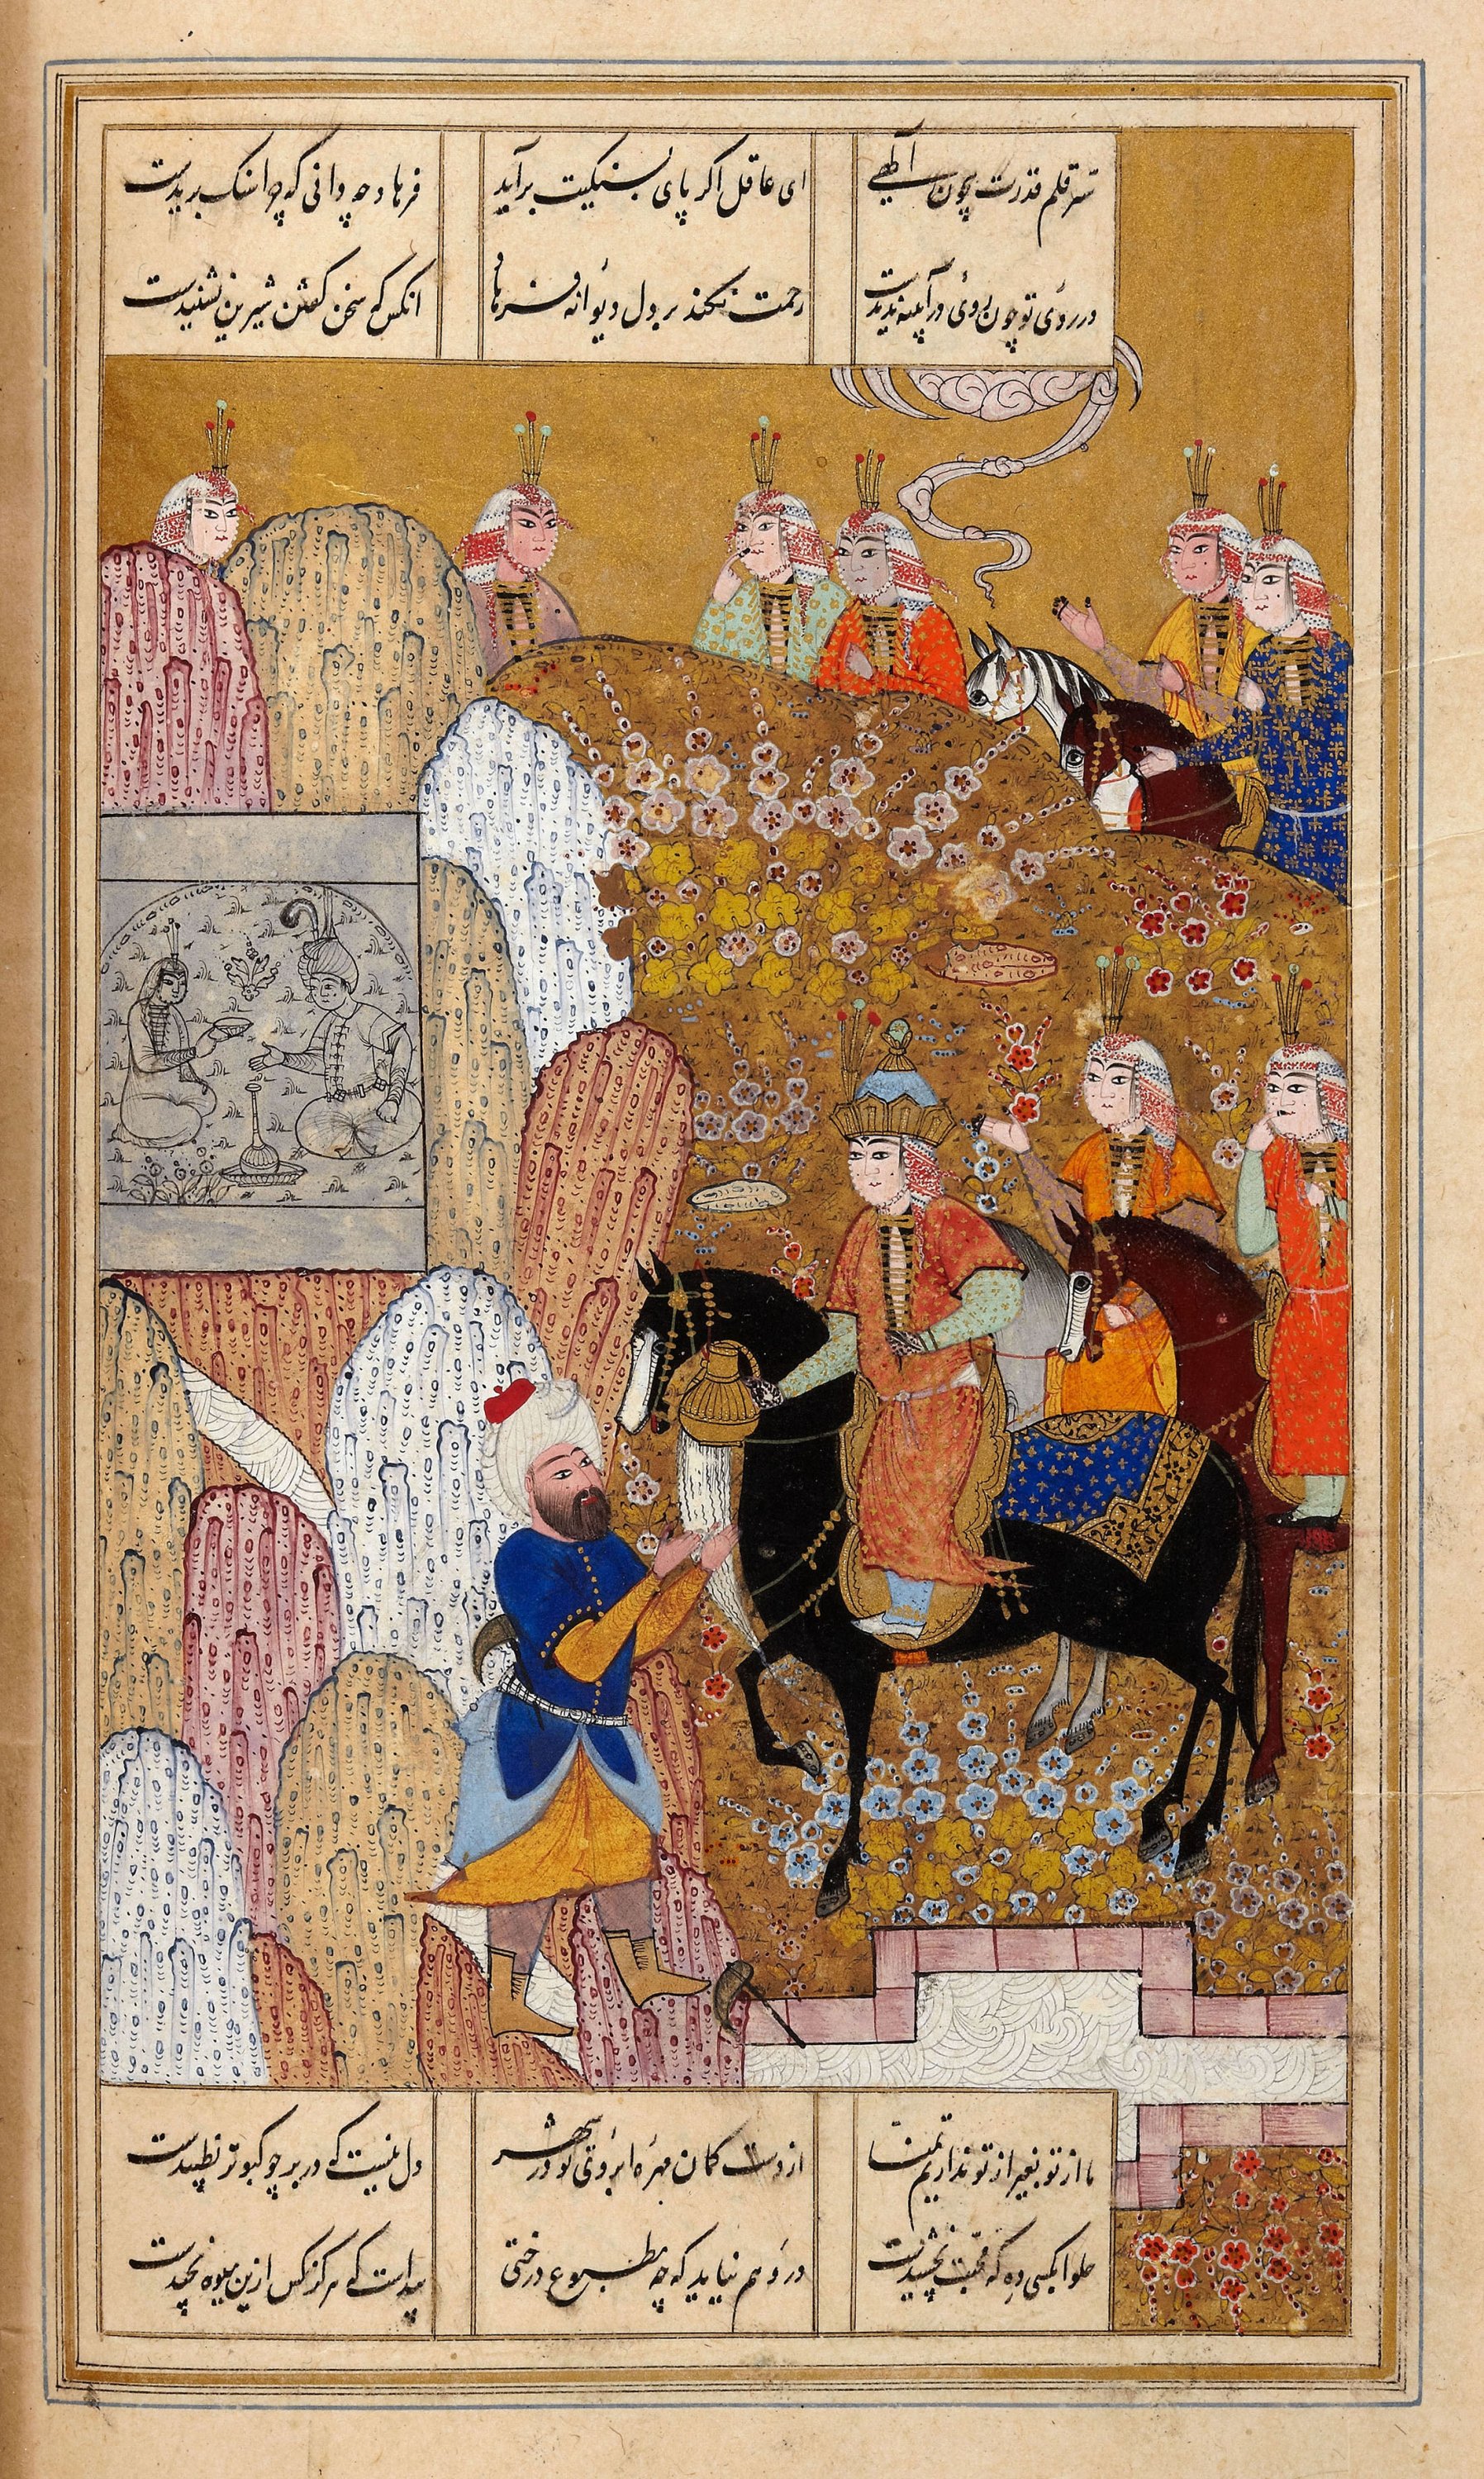 Shirin Visiting Farhad, from The David Collection. (Photo by Fine Art Images/Heritage Images/Getty Images)